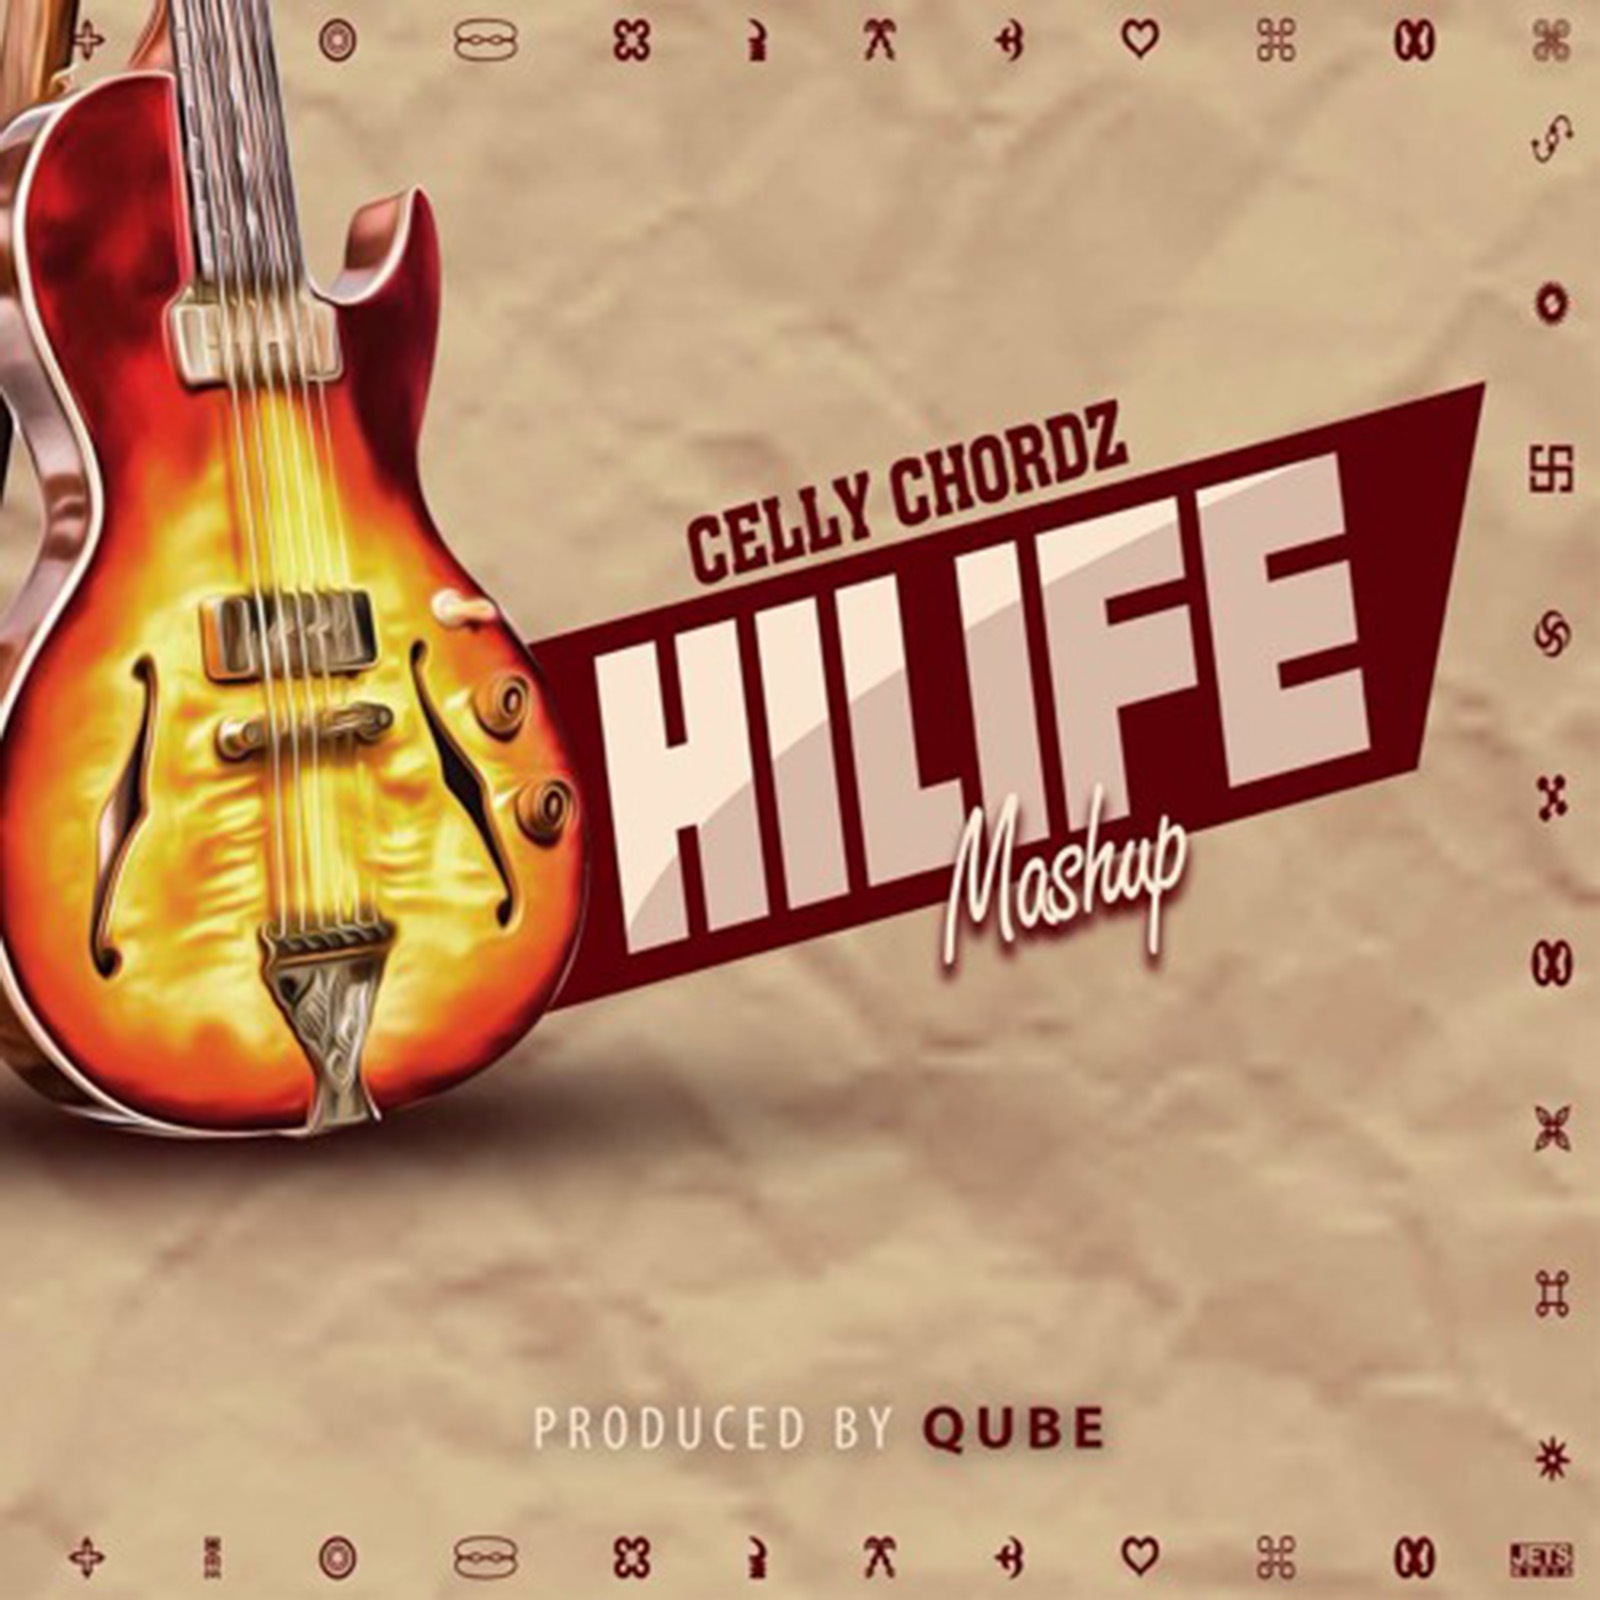 Hilife Mashup by Celly Chordz